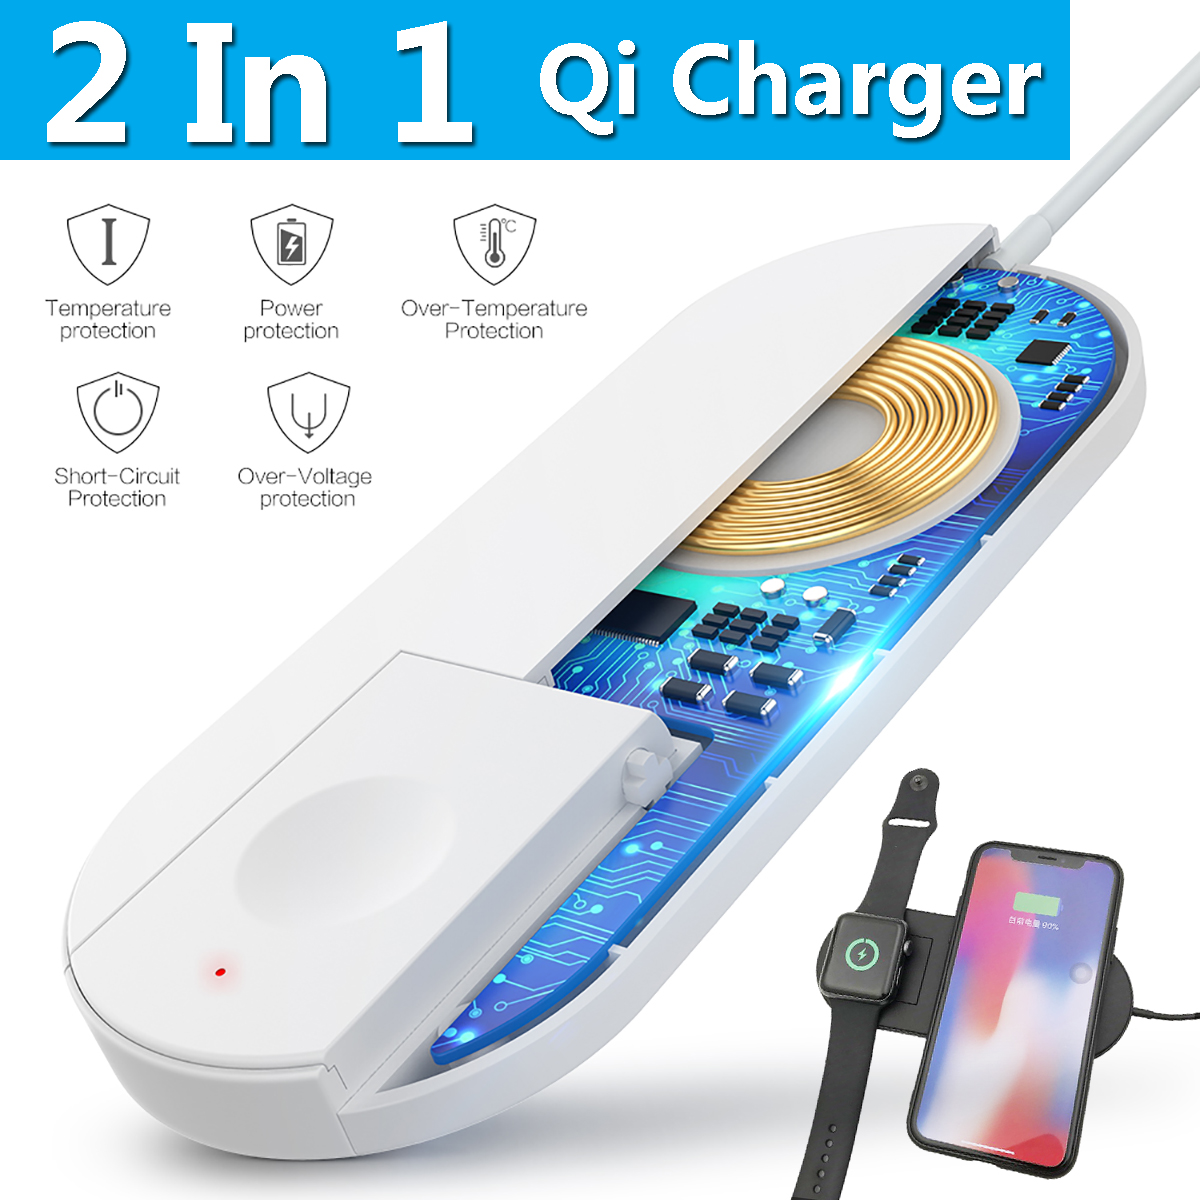 10W9V-2-In-1-Qi-Wireless-Charger-Fast-Charging-Watch-Charger-For-iPhoneSamsungHuaweiApple-Watch-Seri-1420603